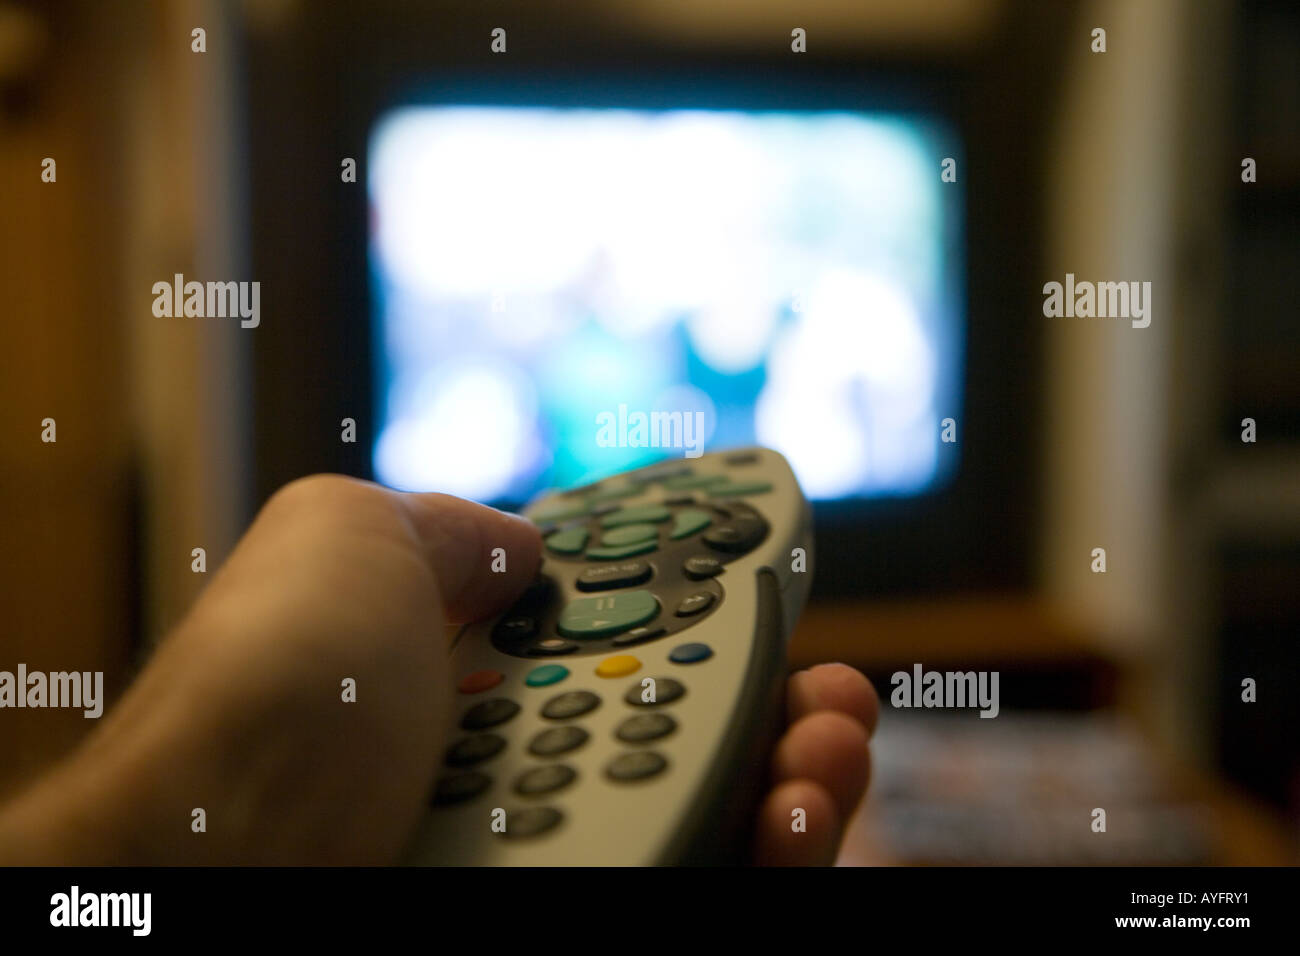 Man's left hand operating Sky remote control with television set in the background Stock Photo